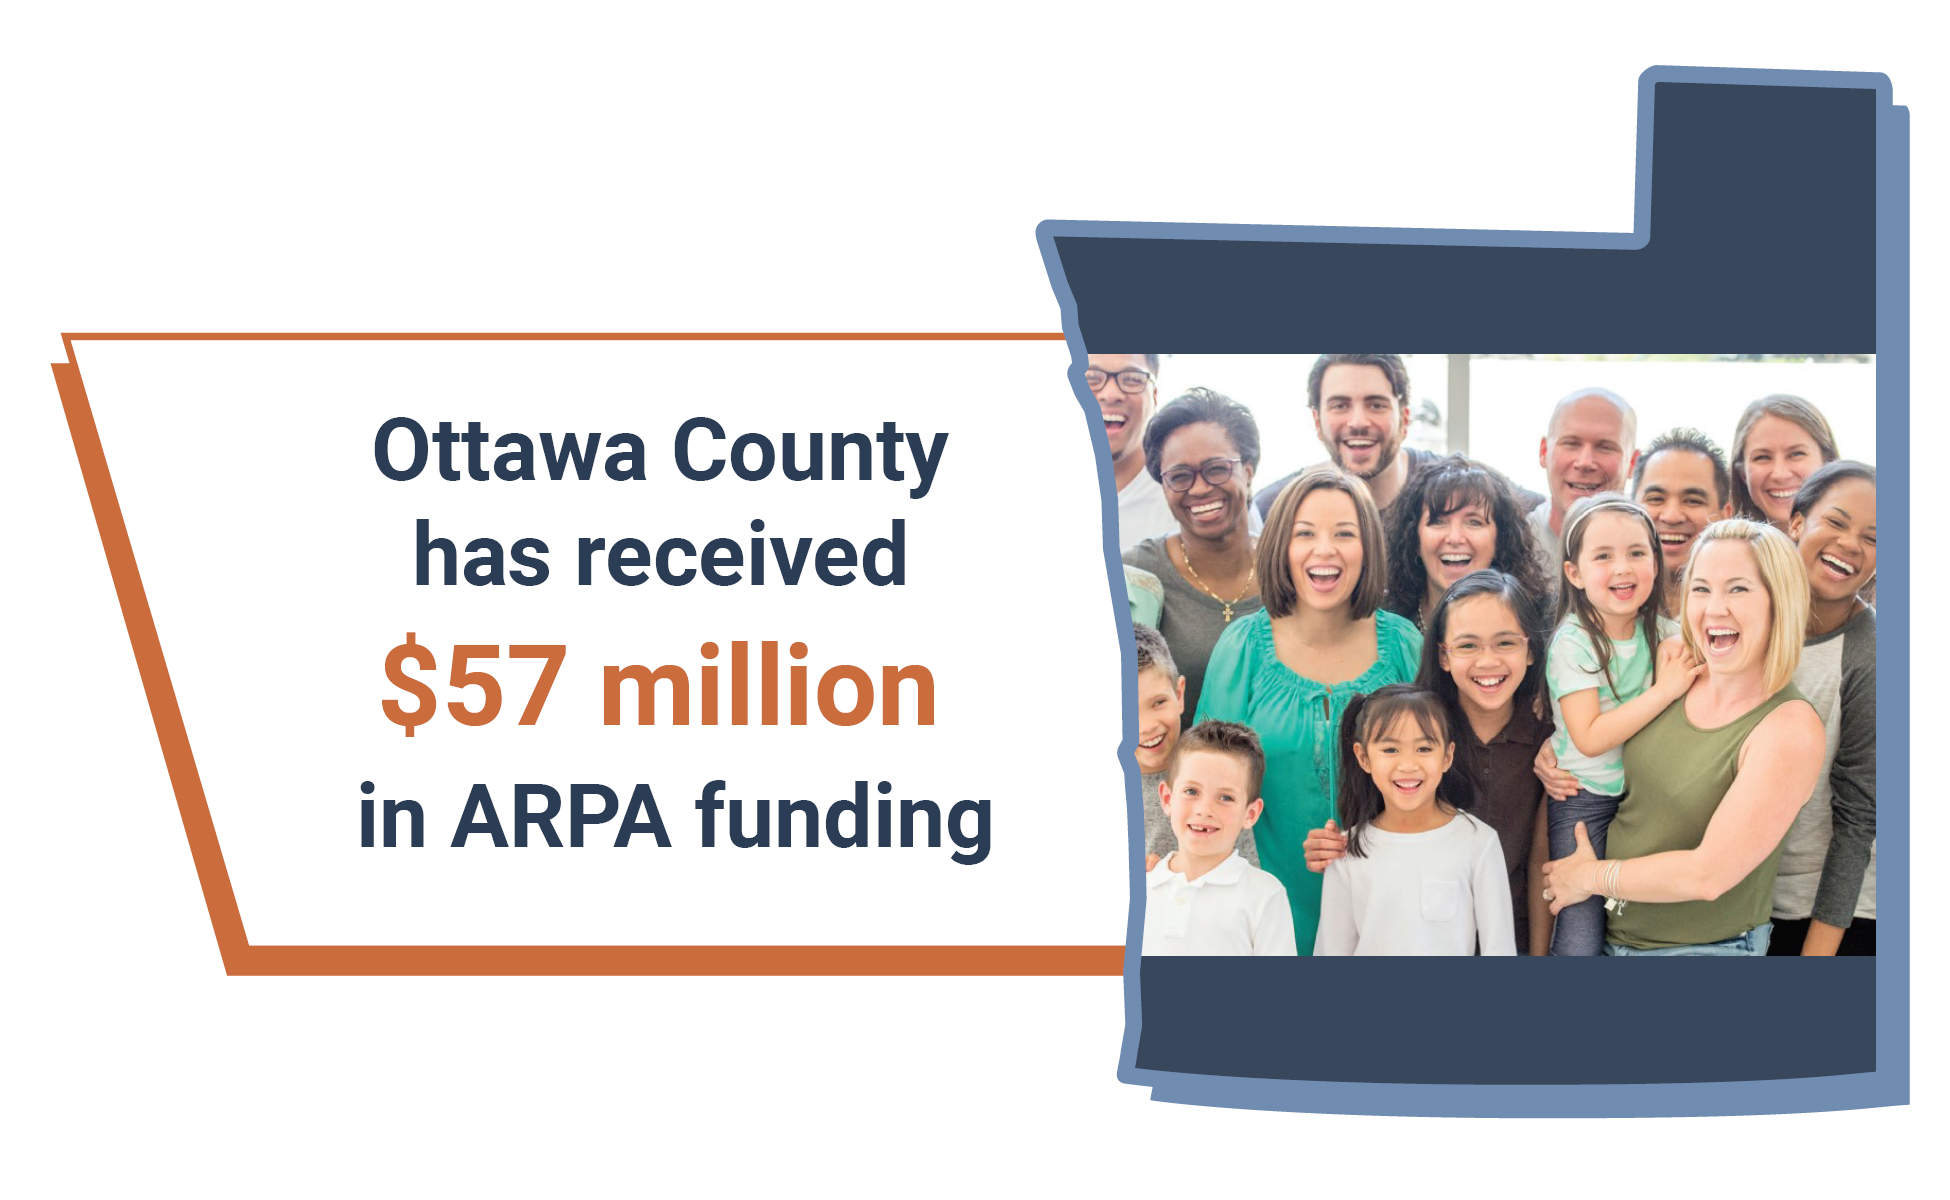 Ottawa County has received $57 million in ARPA funding